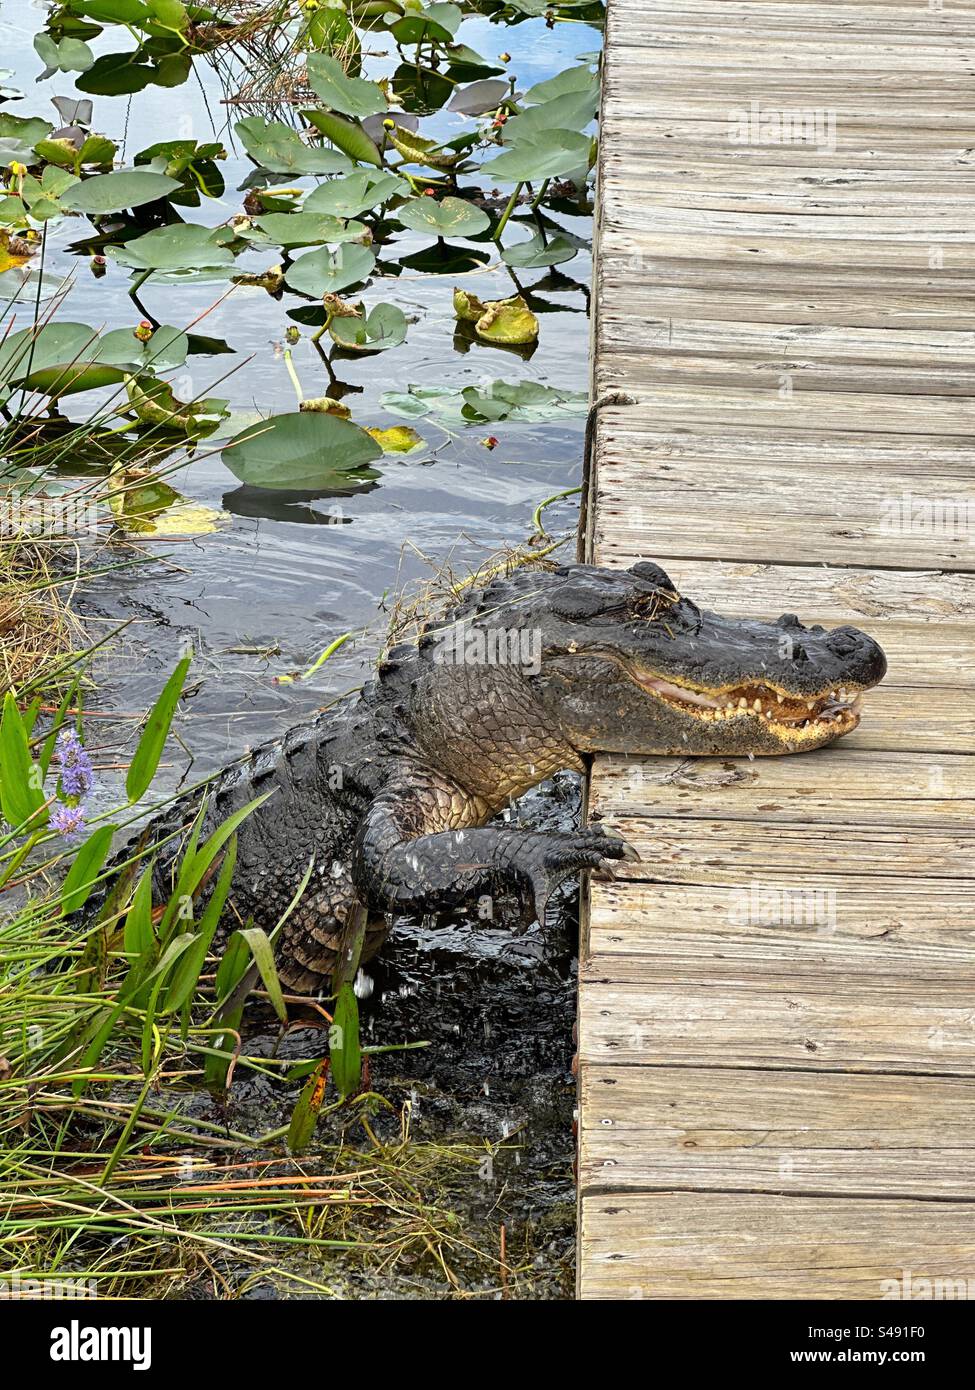 Alligator climbing out of the water onto a boardwalk in the Everglades. No people. Stock Photo